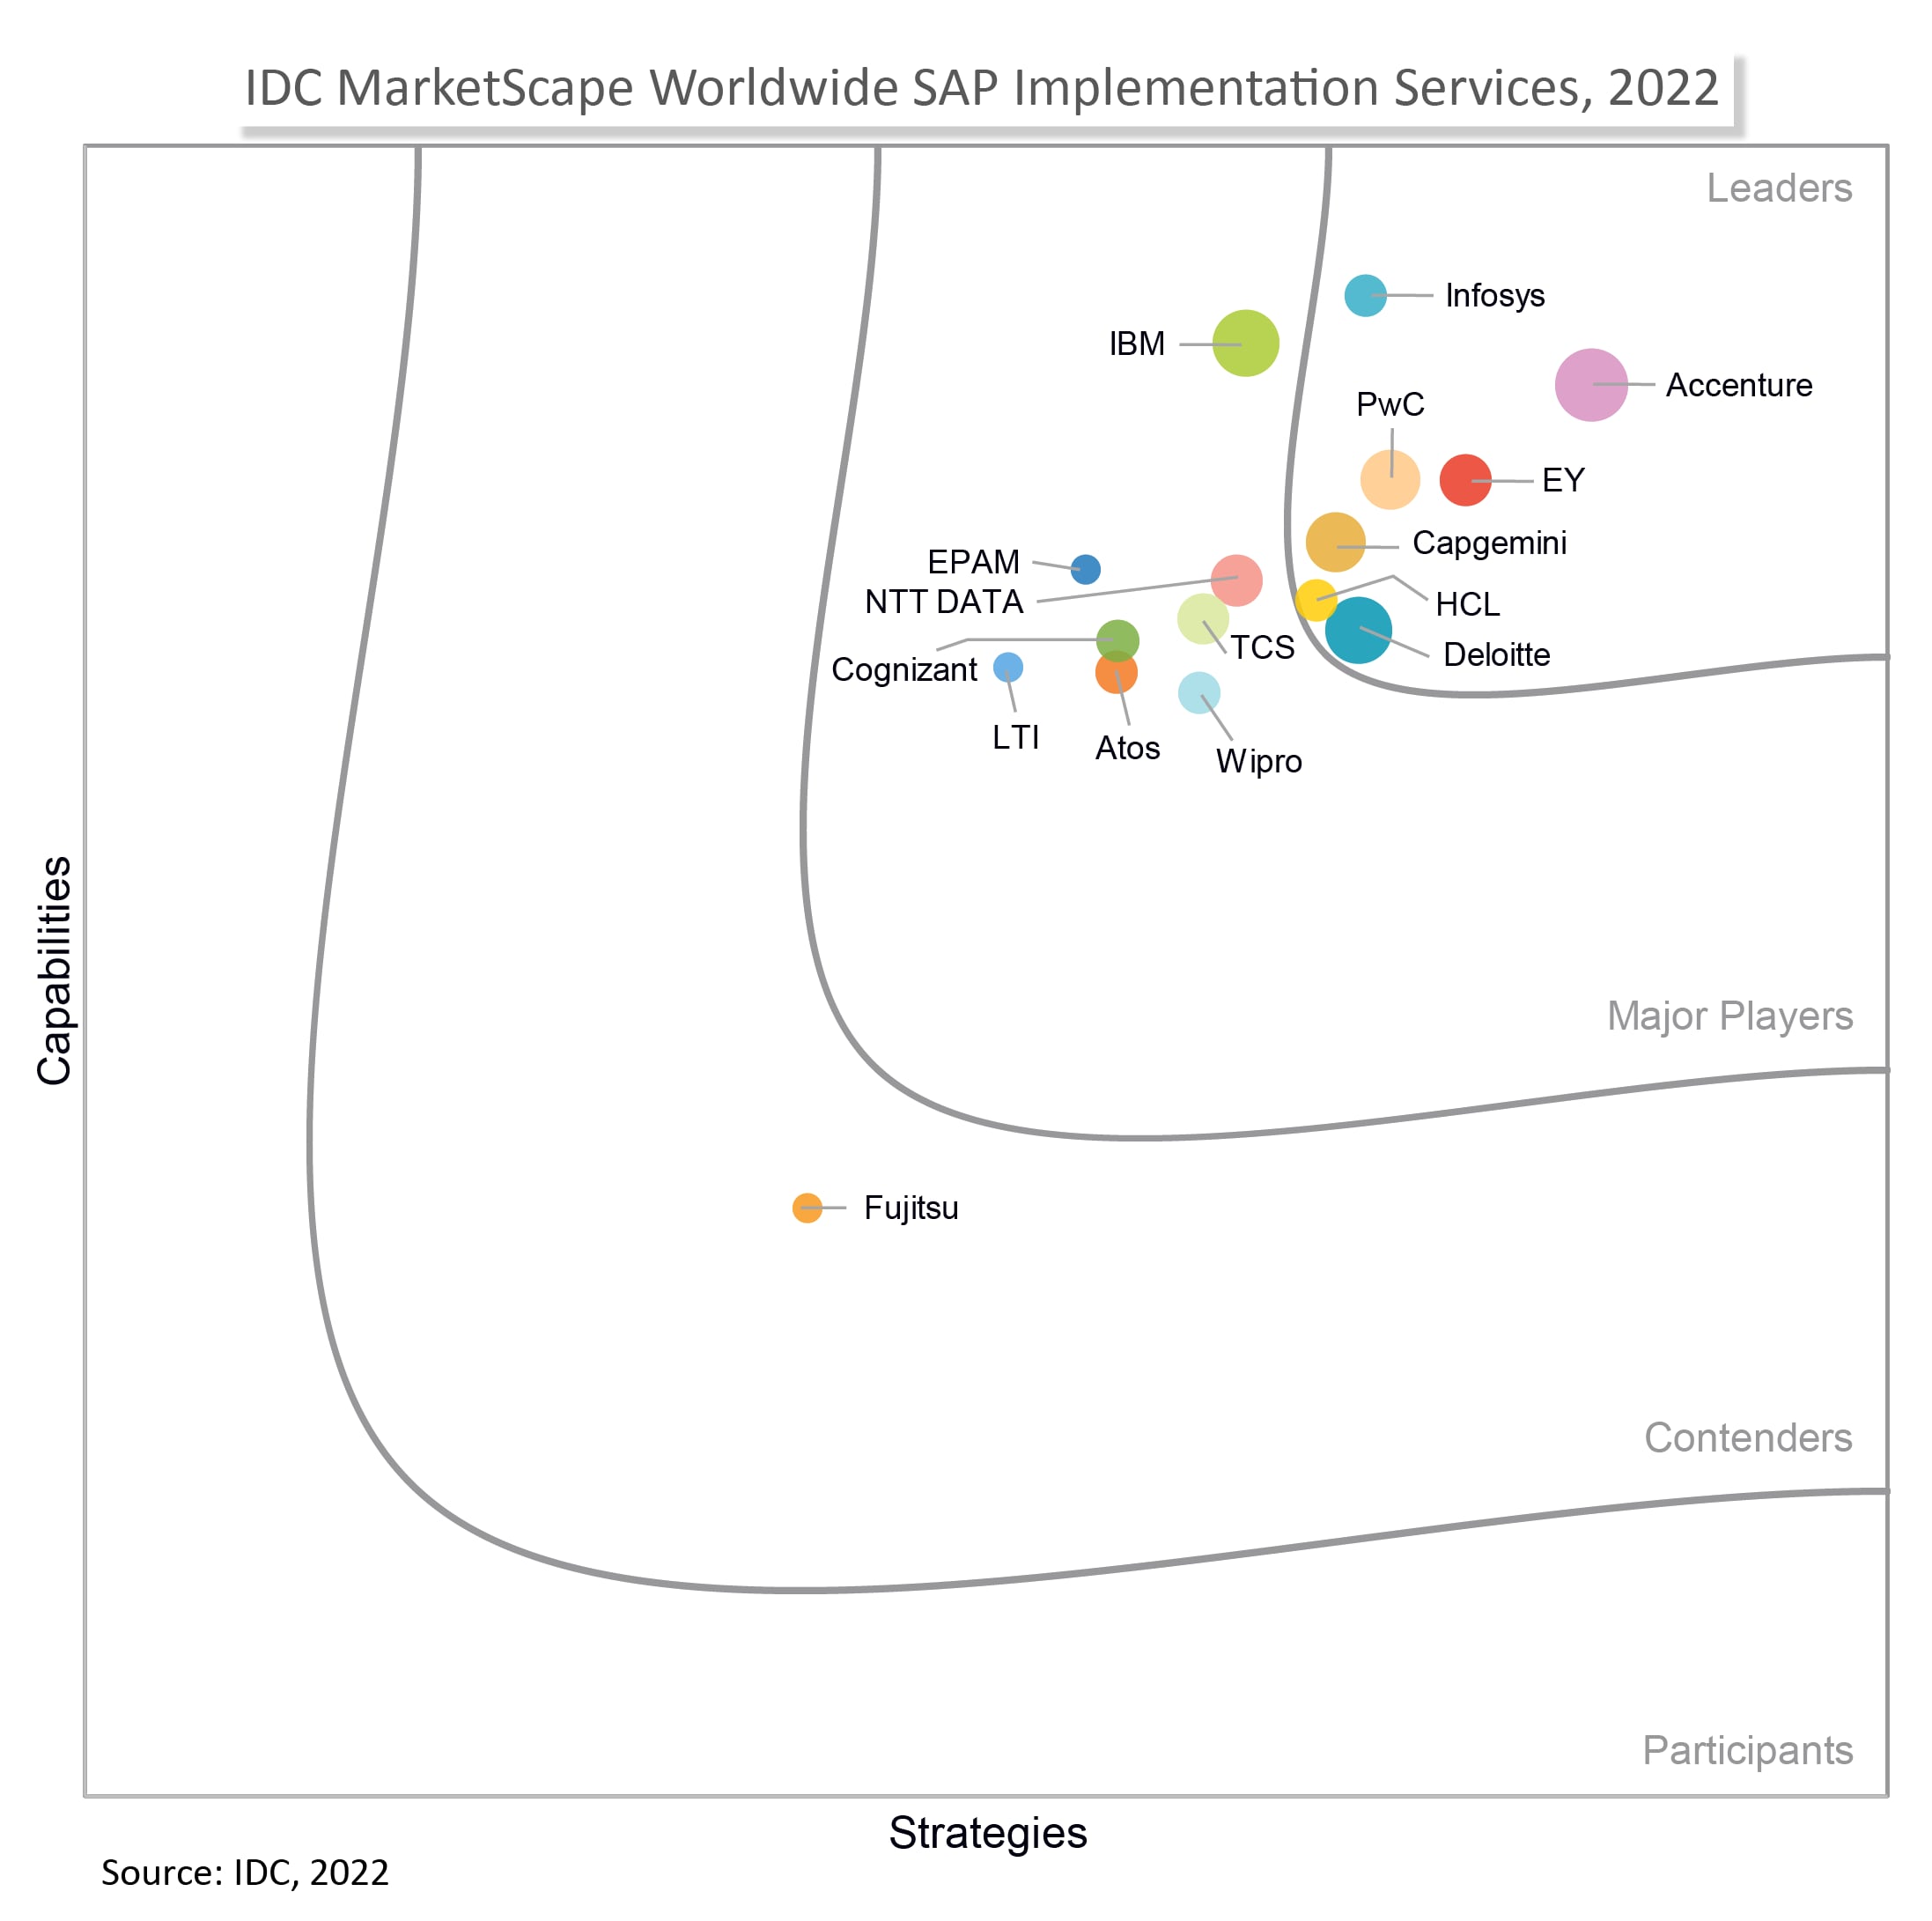 Infosys Recognized as a Leader in IDC MarketScape for Worldwide SAP Implementation Services 2022